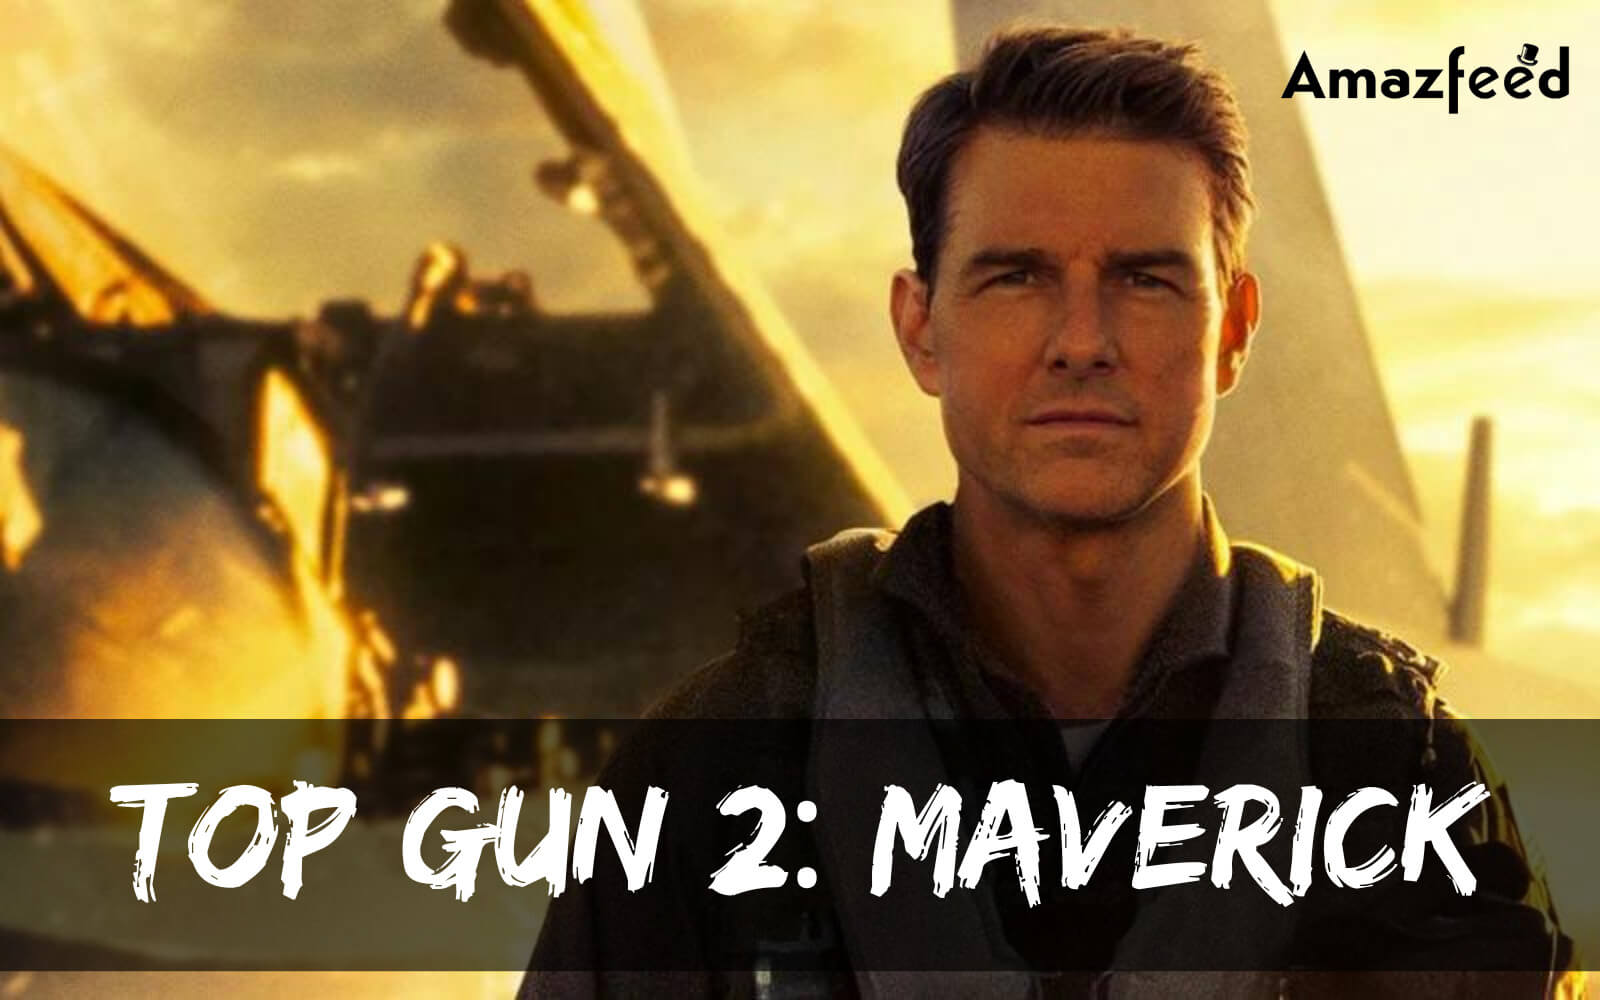 When Is Top Gun 2 Maverick Coming Out (Release Date)